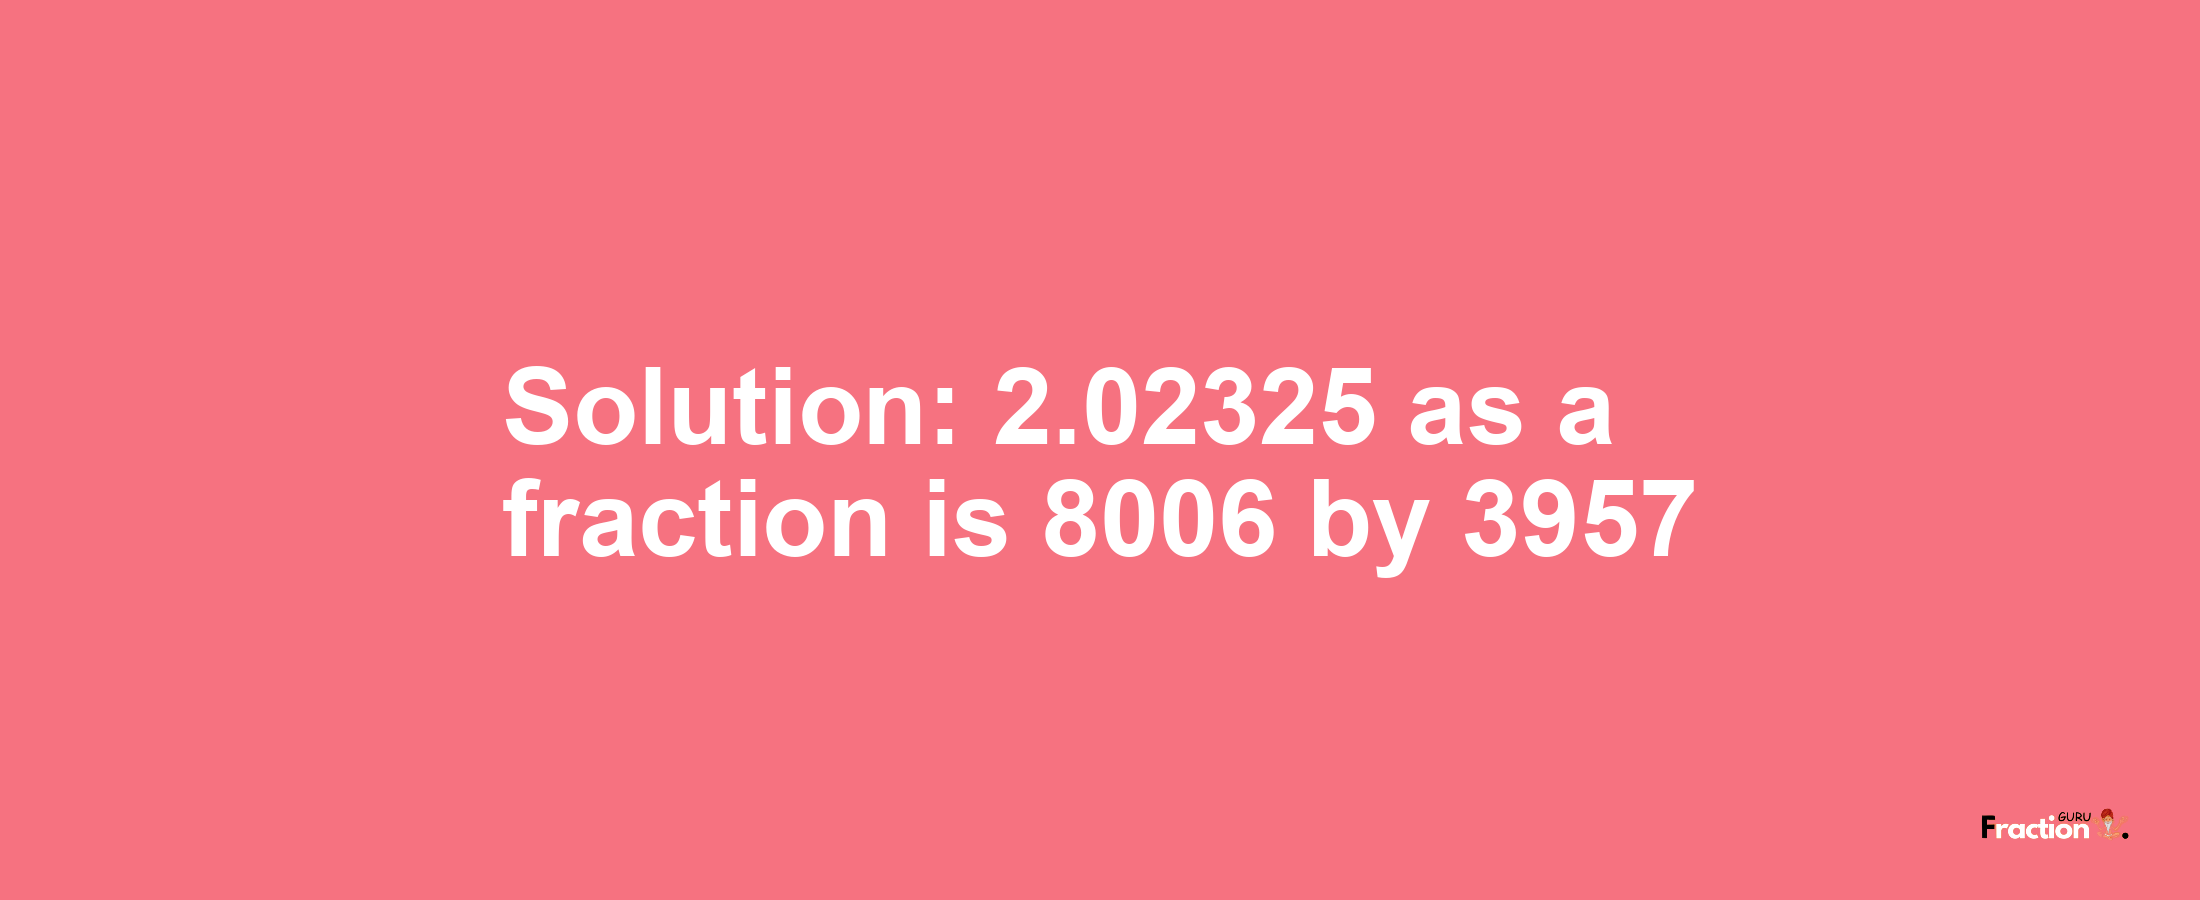 Solution:2.02325 as a fraction is 8006/3957